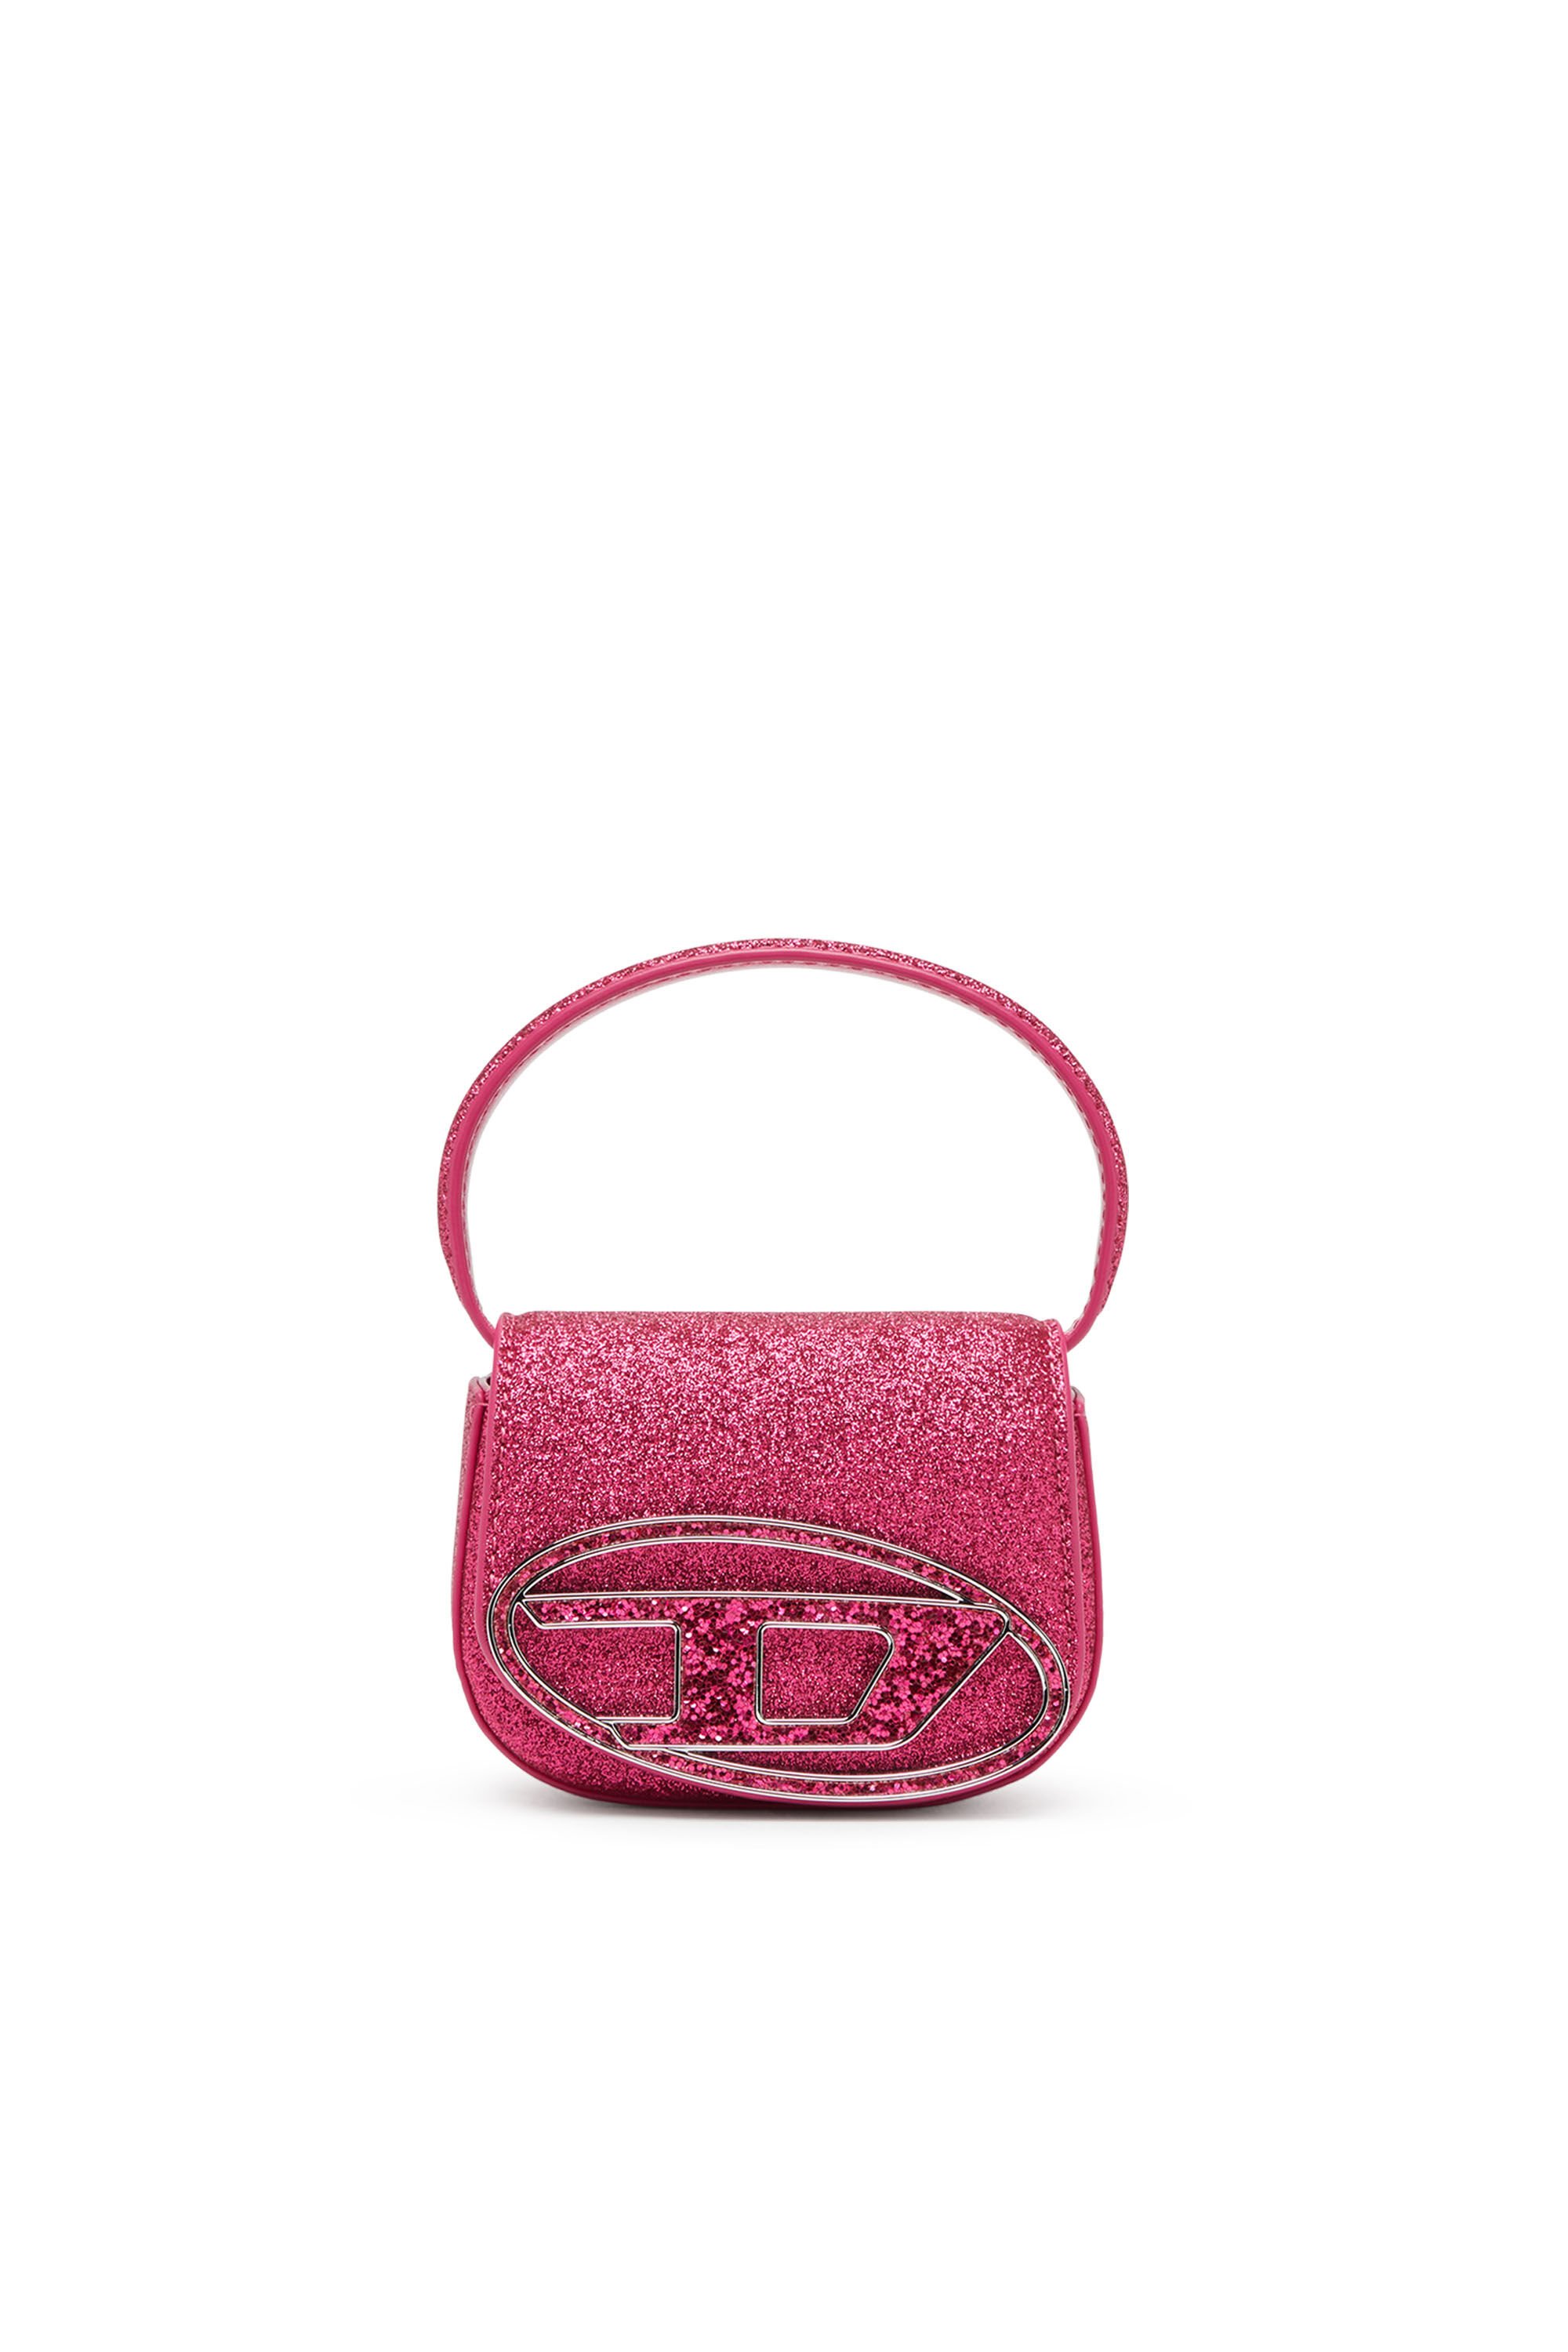 Diesel - 1DR XS, Woman 1DR XS-Iconic mini bag in glitter fabric in Pink - Image 1